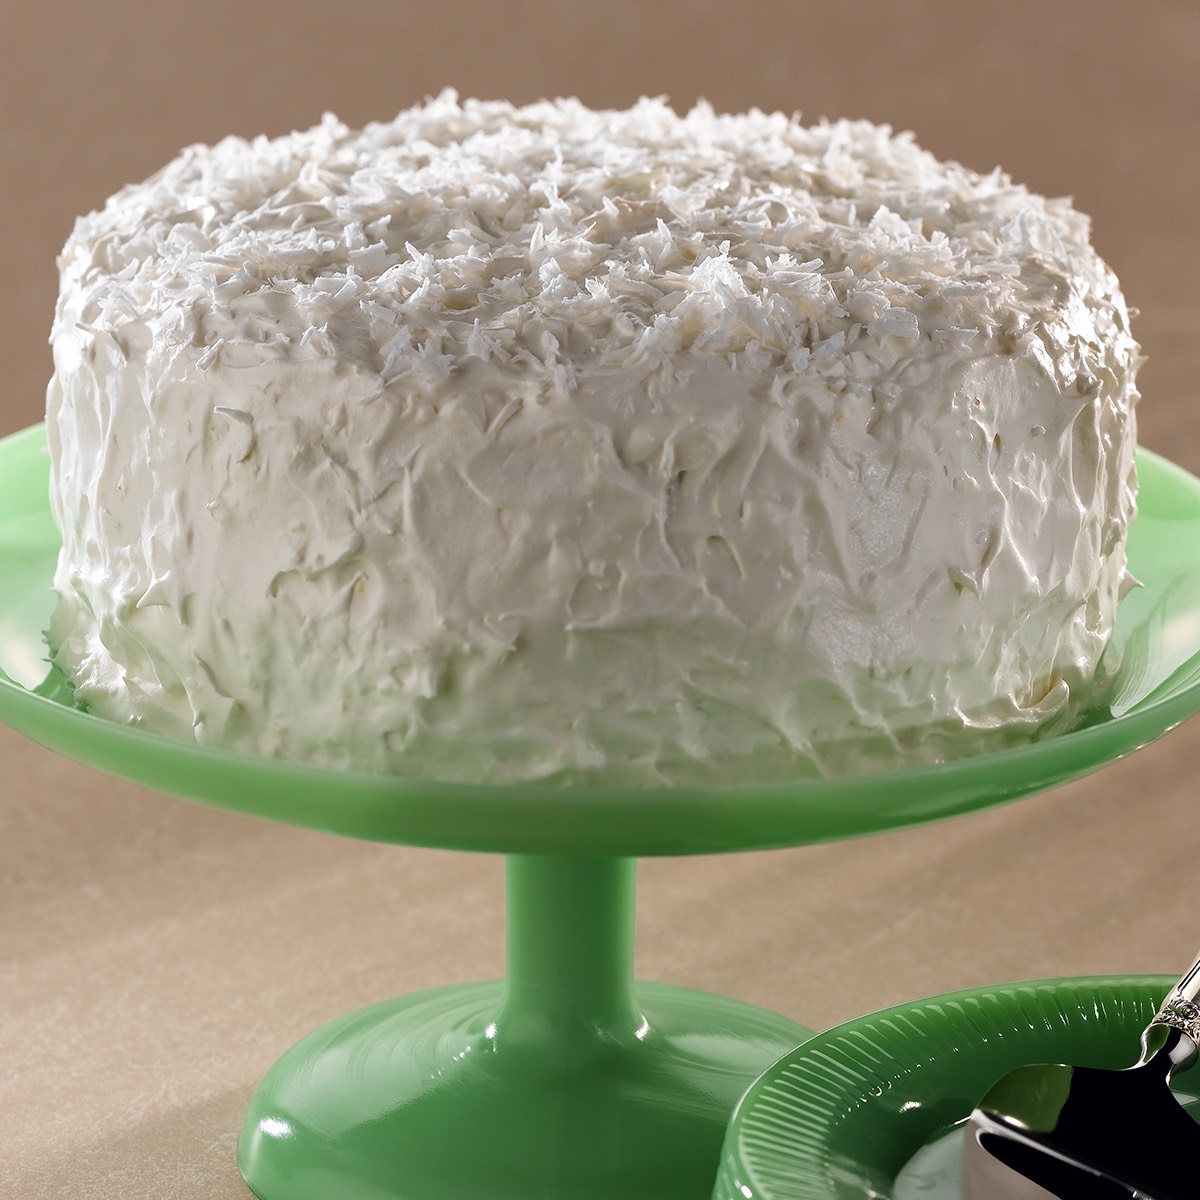 Sweet coconut cake cover with vanilla frosting and coconut shavings on top